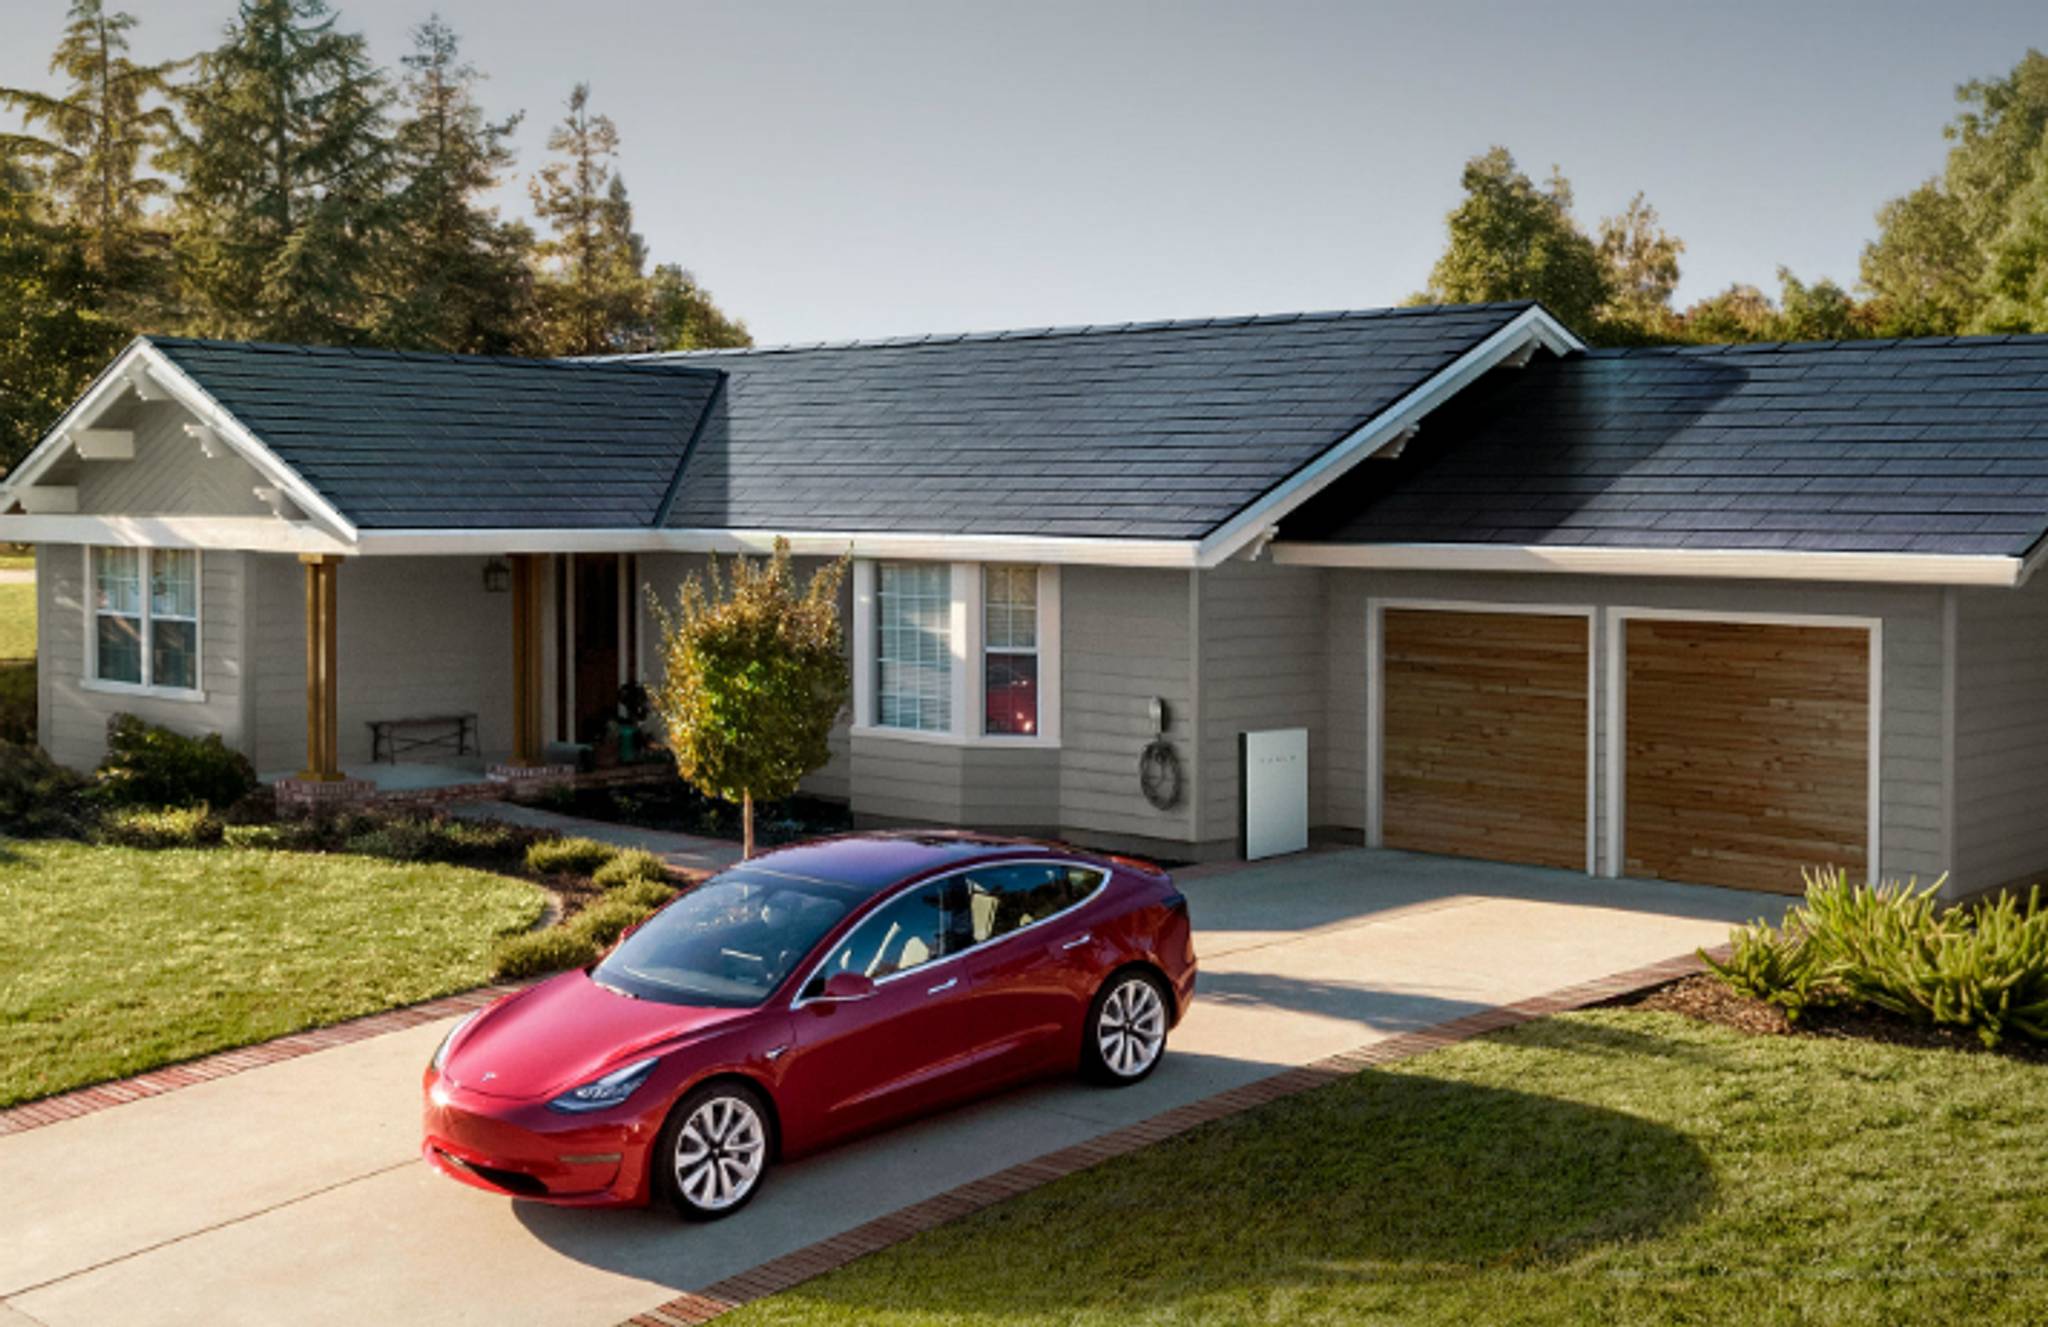 Tesla has created solar roofing you can't see